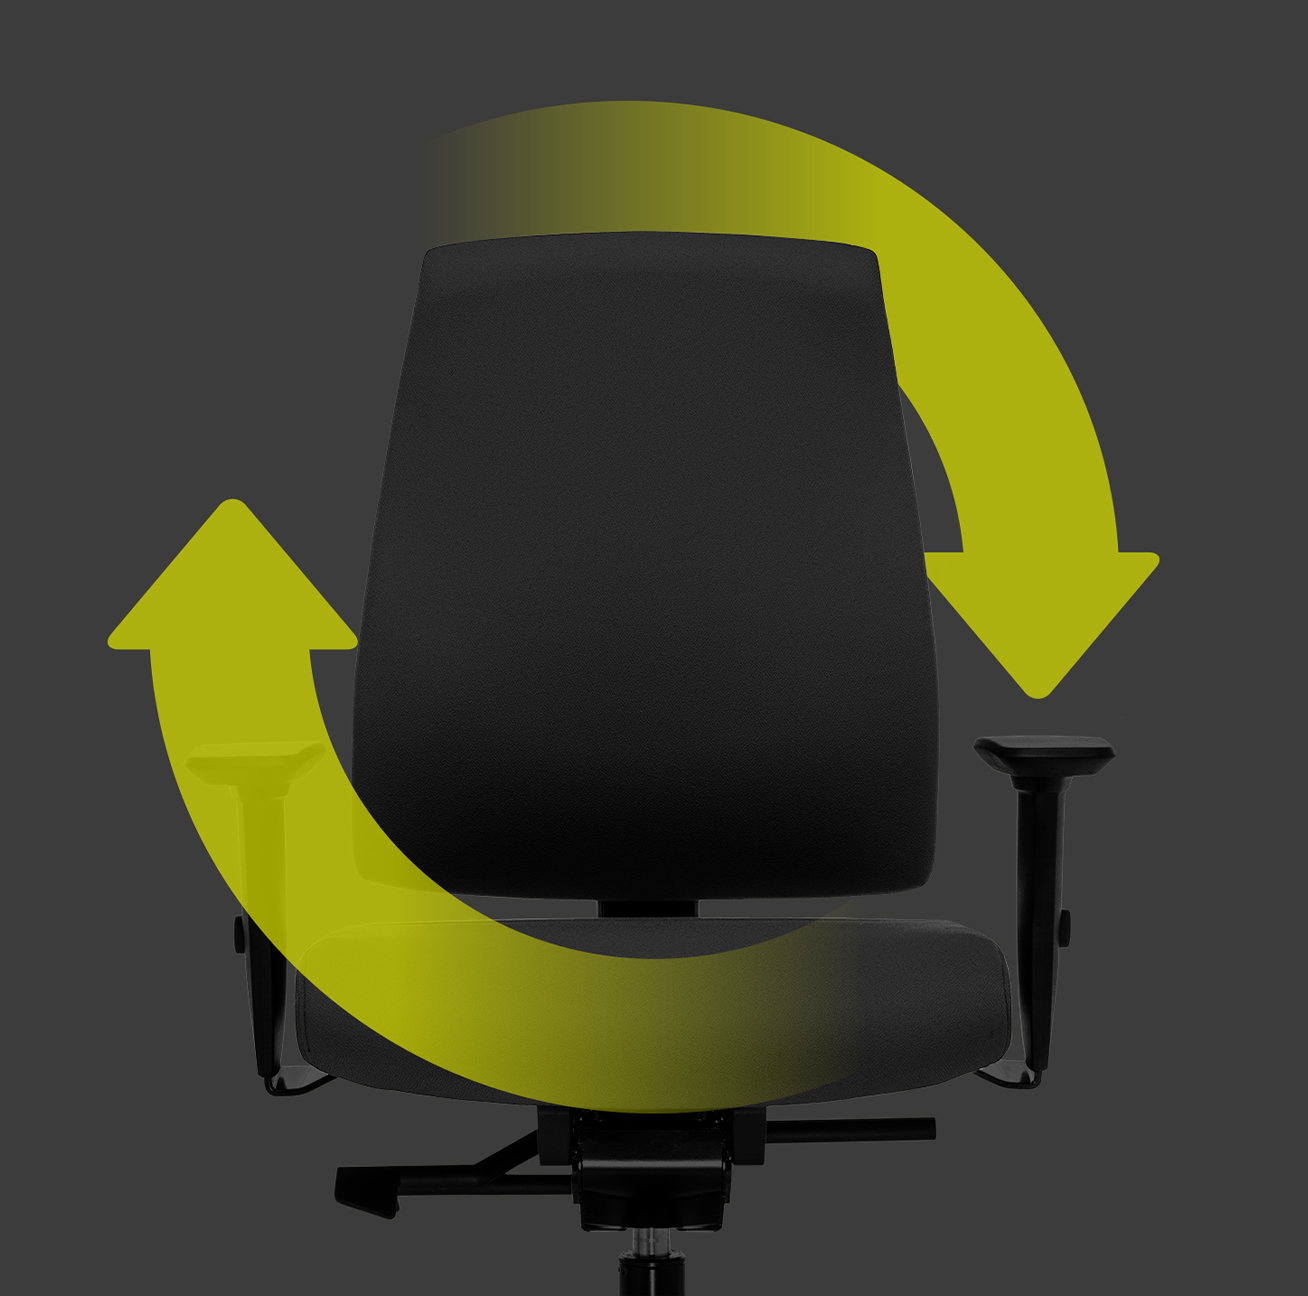 Side view of the ergonomic Goal swivel chair with black upholstered backrest, black seat cover, black T-armrests and plastic parts in black (including base, column) with two green arrows forming a circle around the chair. This indicates the sustainability and reusability of the chair. | by Hans-Georg Piorek